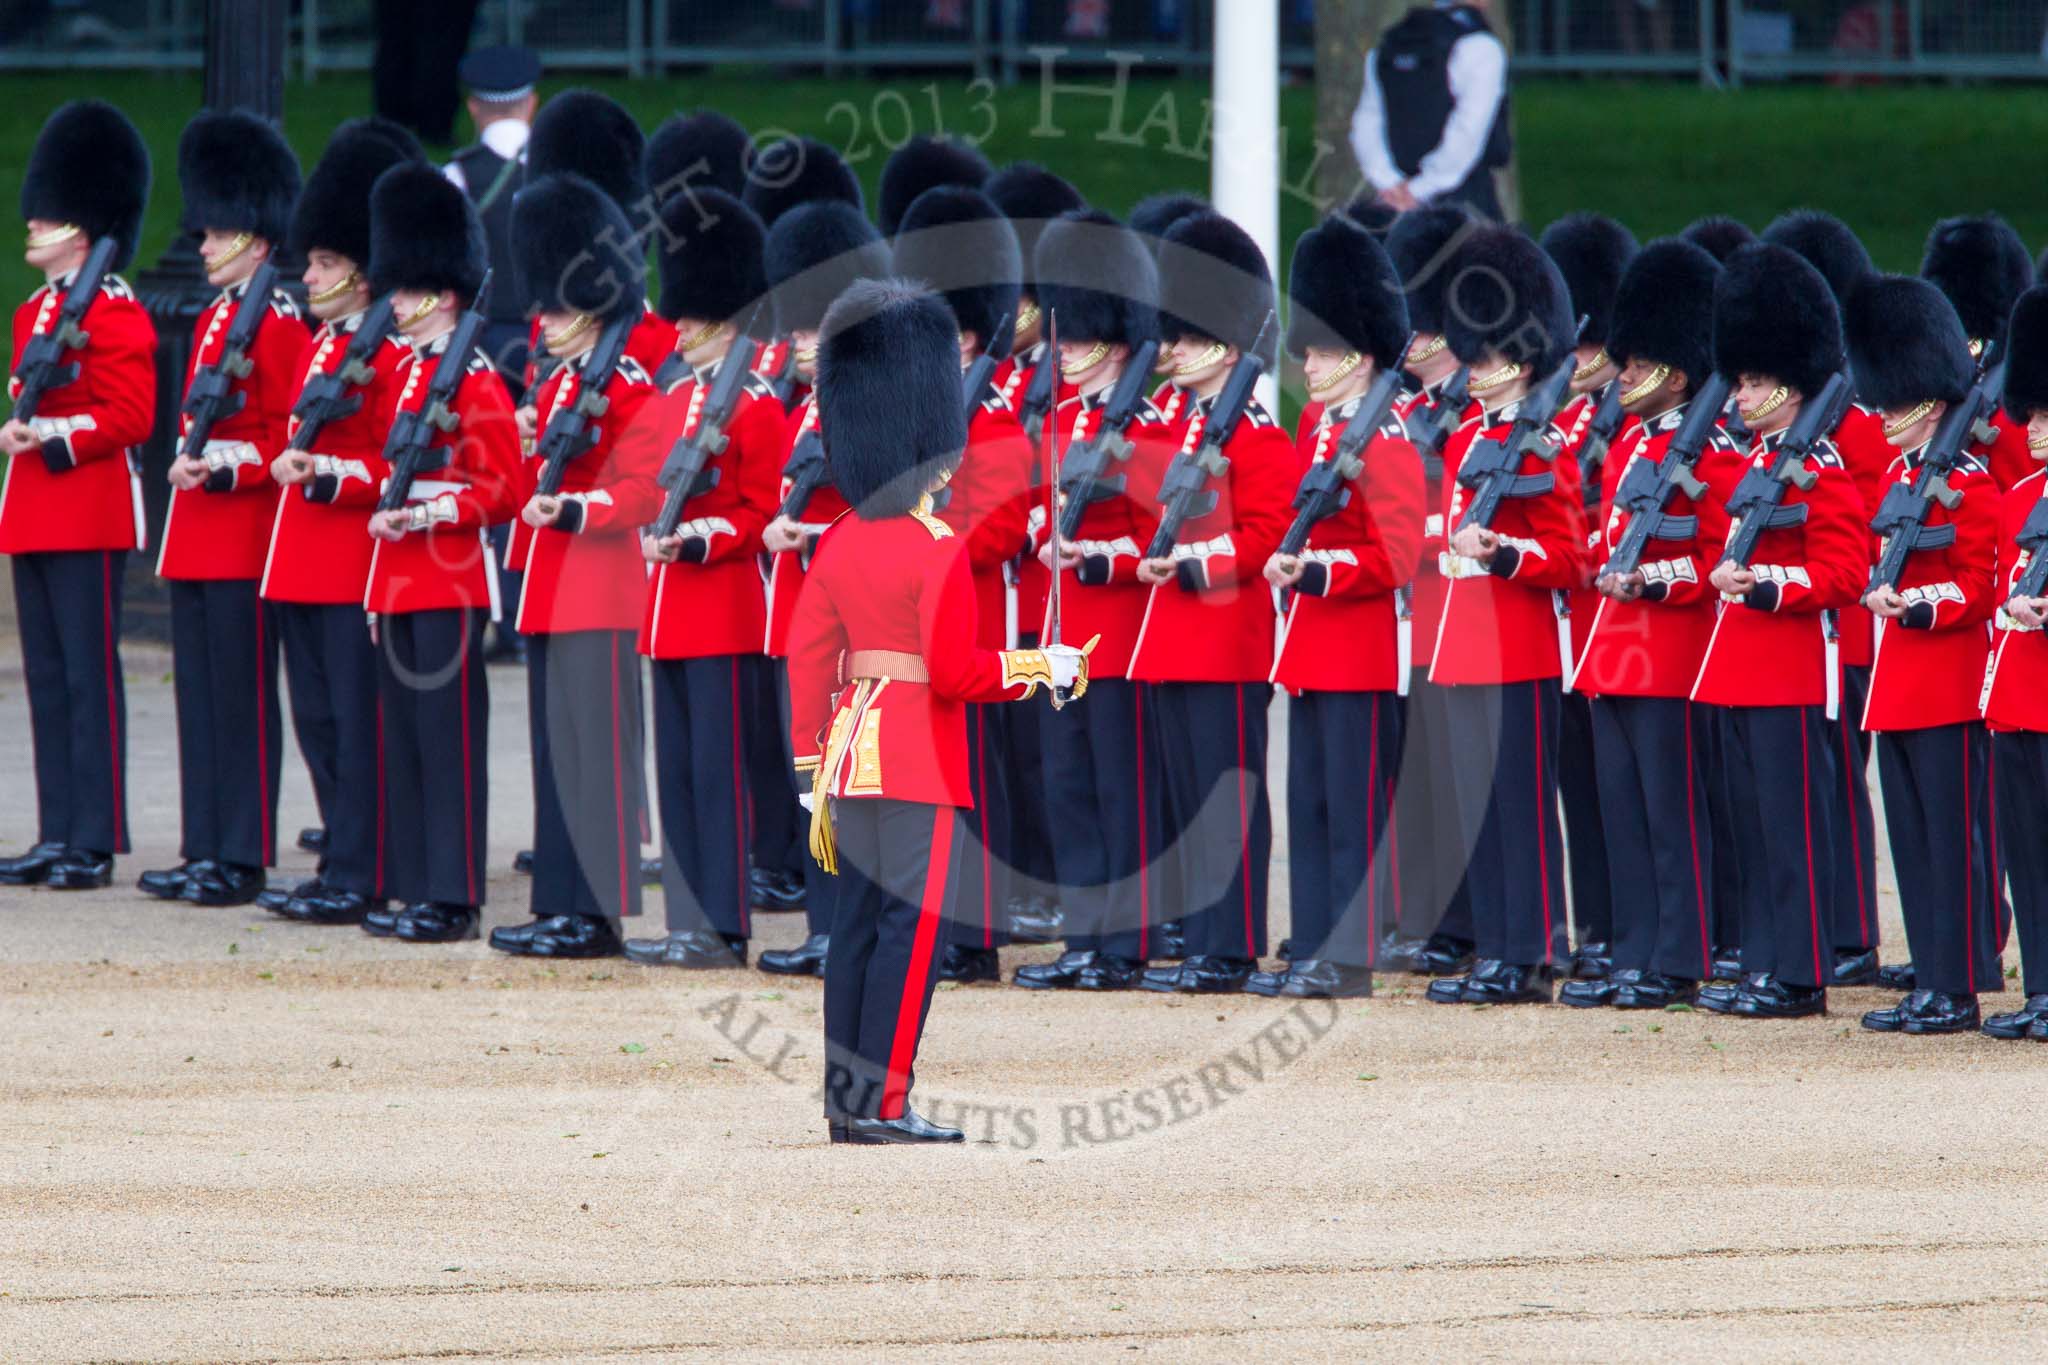 Trooping the Colour 2013: Captain P W Foster with No. 5 Guard, F Company Scots Guards. Image #79, 15 June 2013 10:23 Horse Guards Parade, London, UK